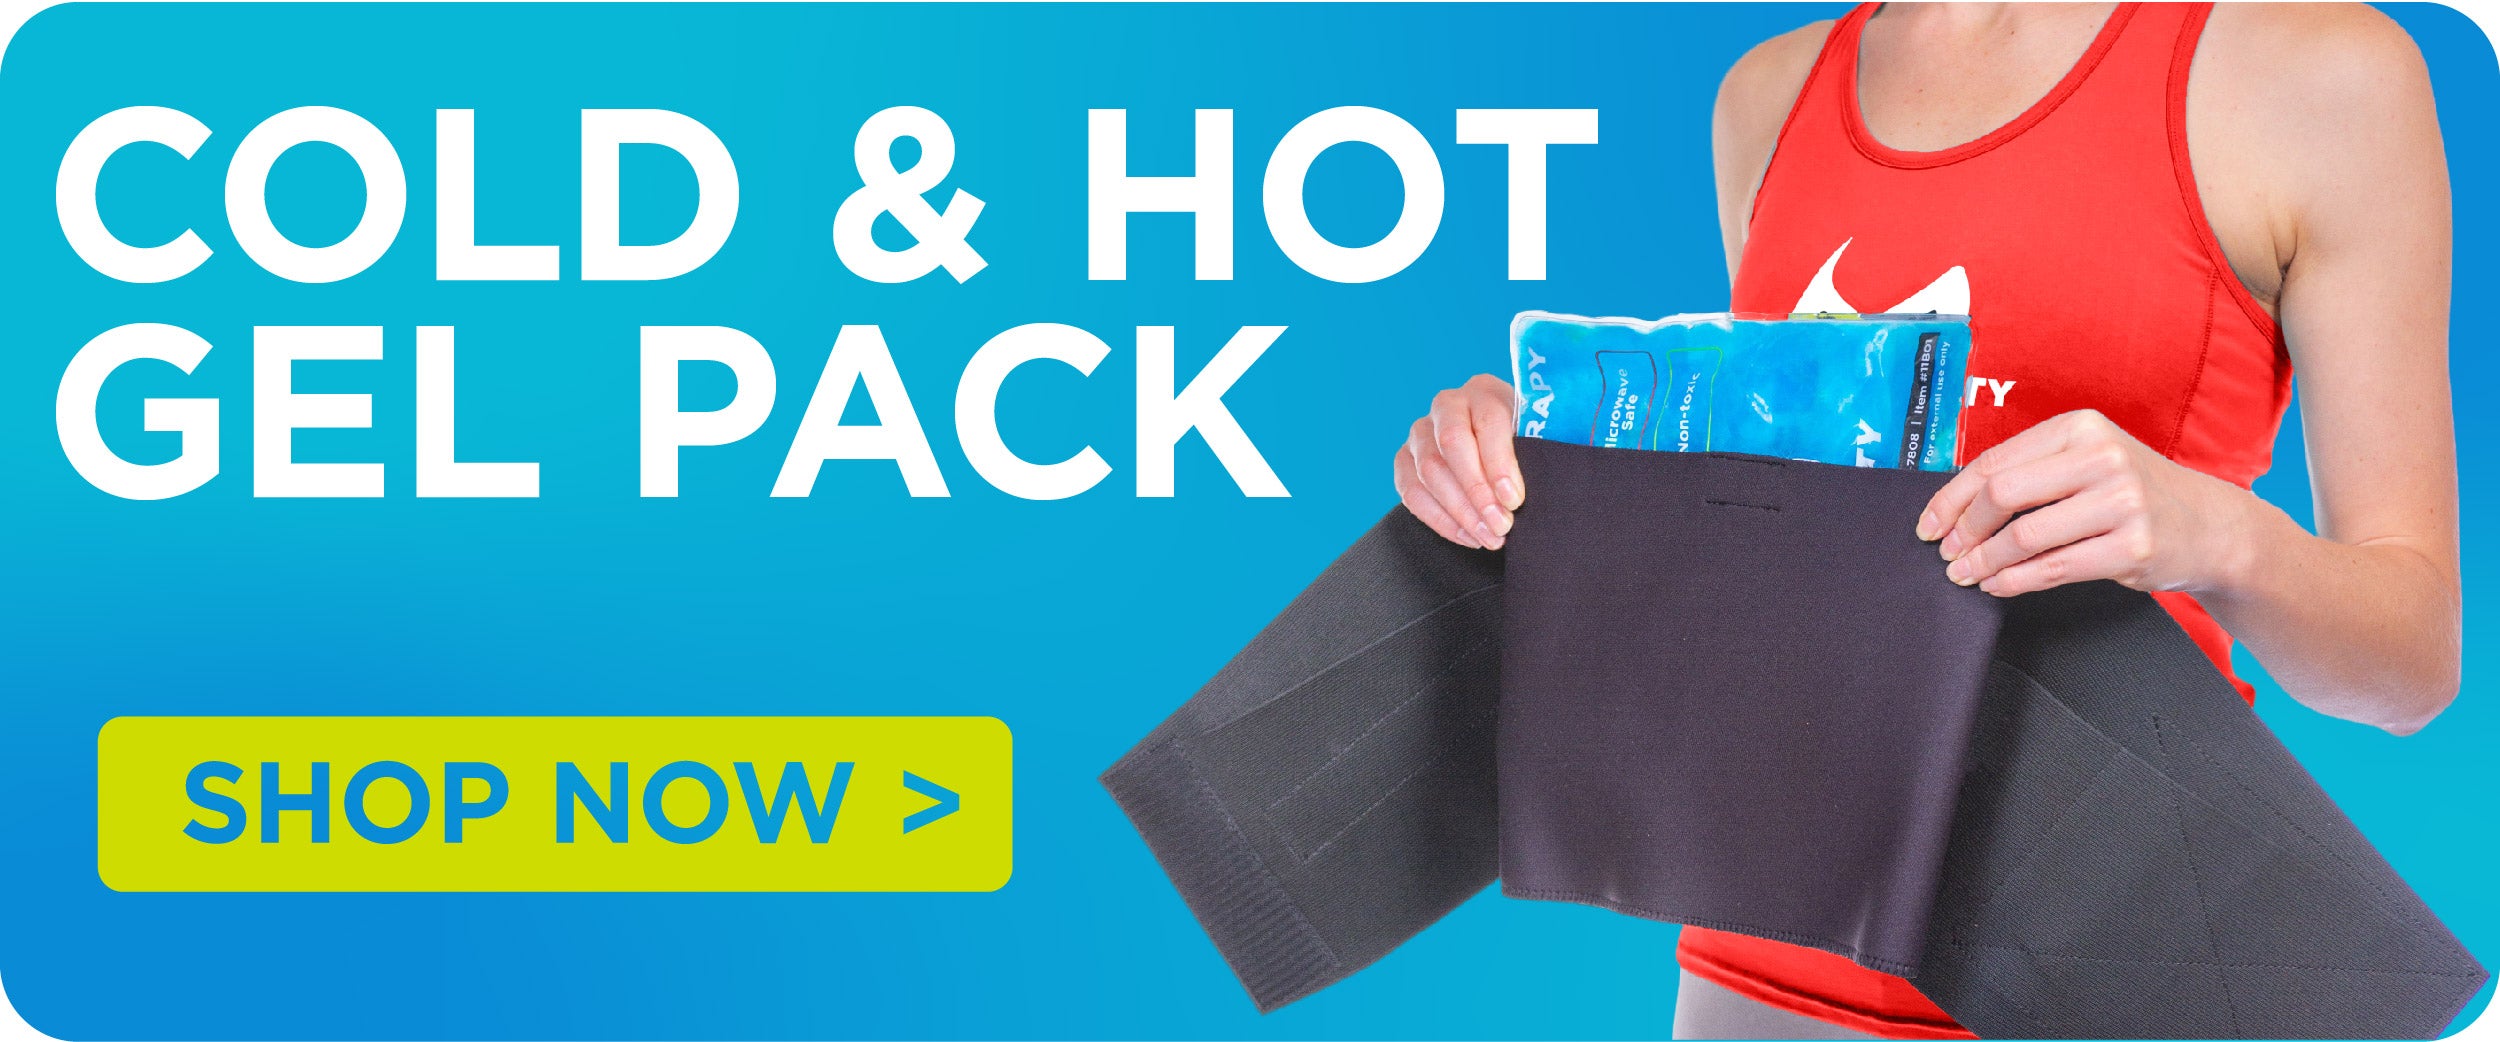 purchase a cold and got gel pack for your lower back brace